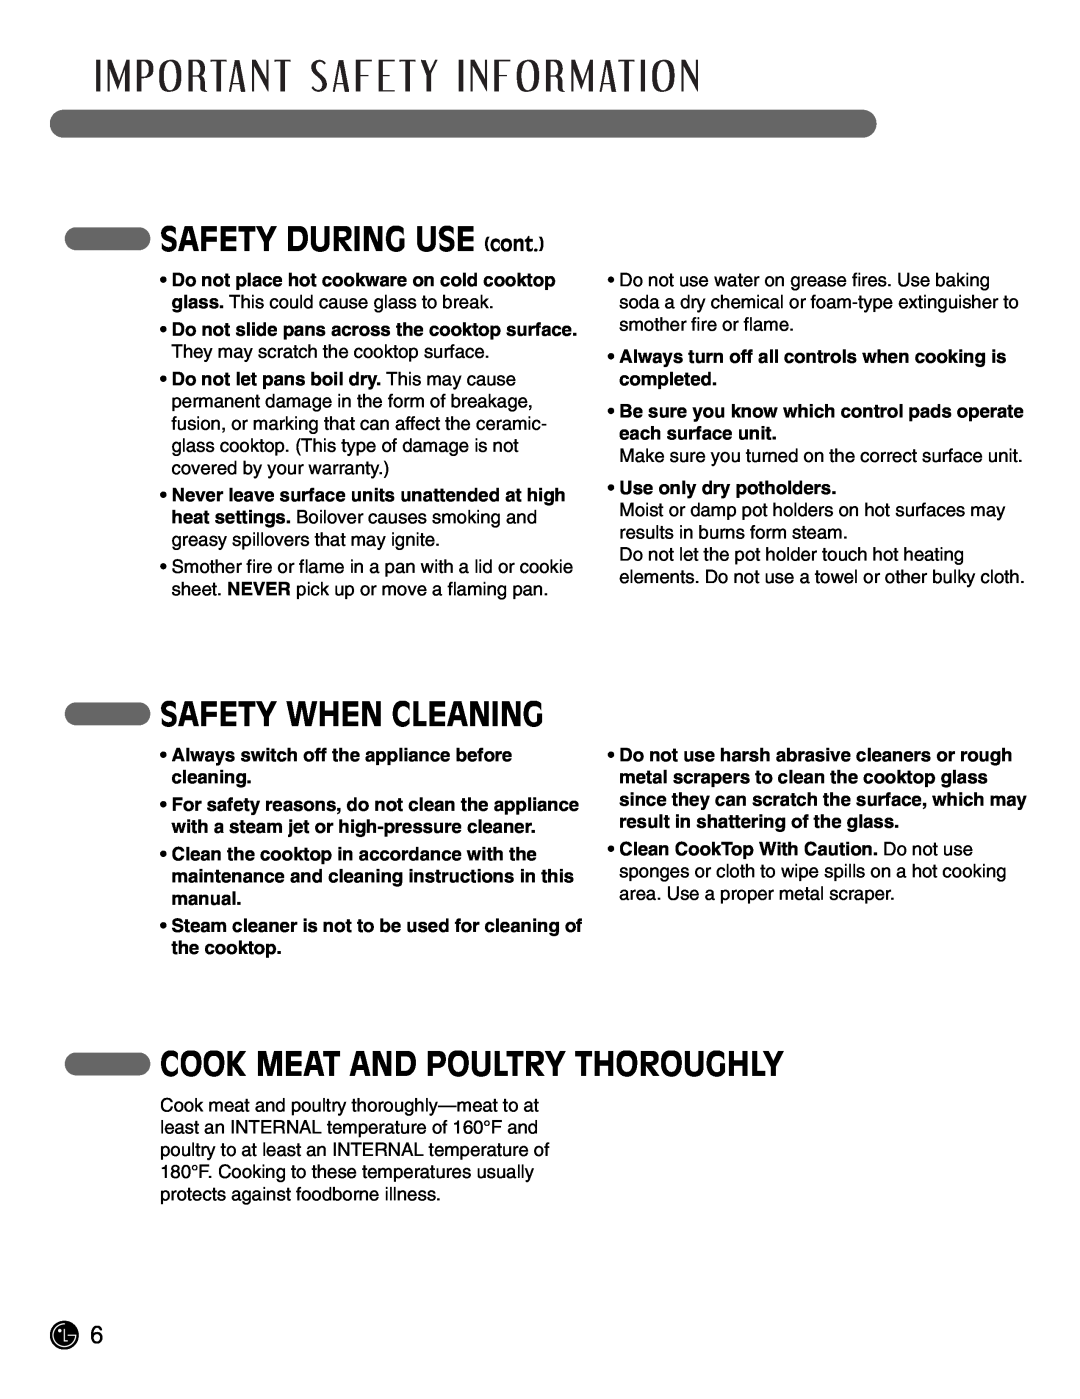 LG Electronics LCE3681ST, LCE3081ST manual SAFETY DURING USE cont, Safety When Cleaning, Cook Meat And Poultry Thoroughly 